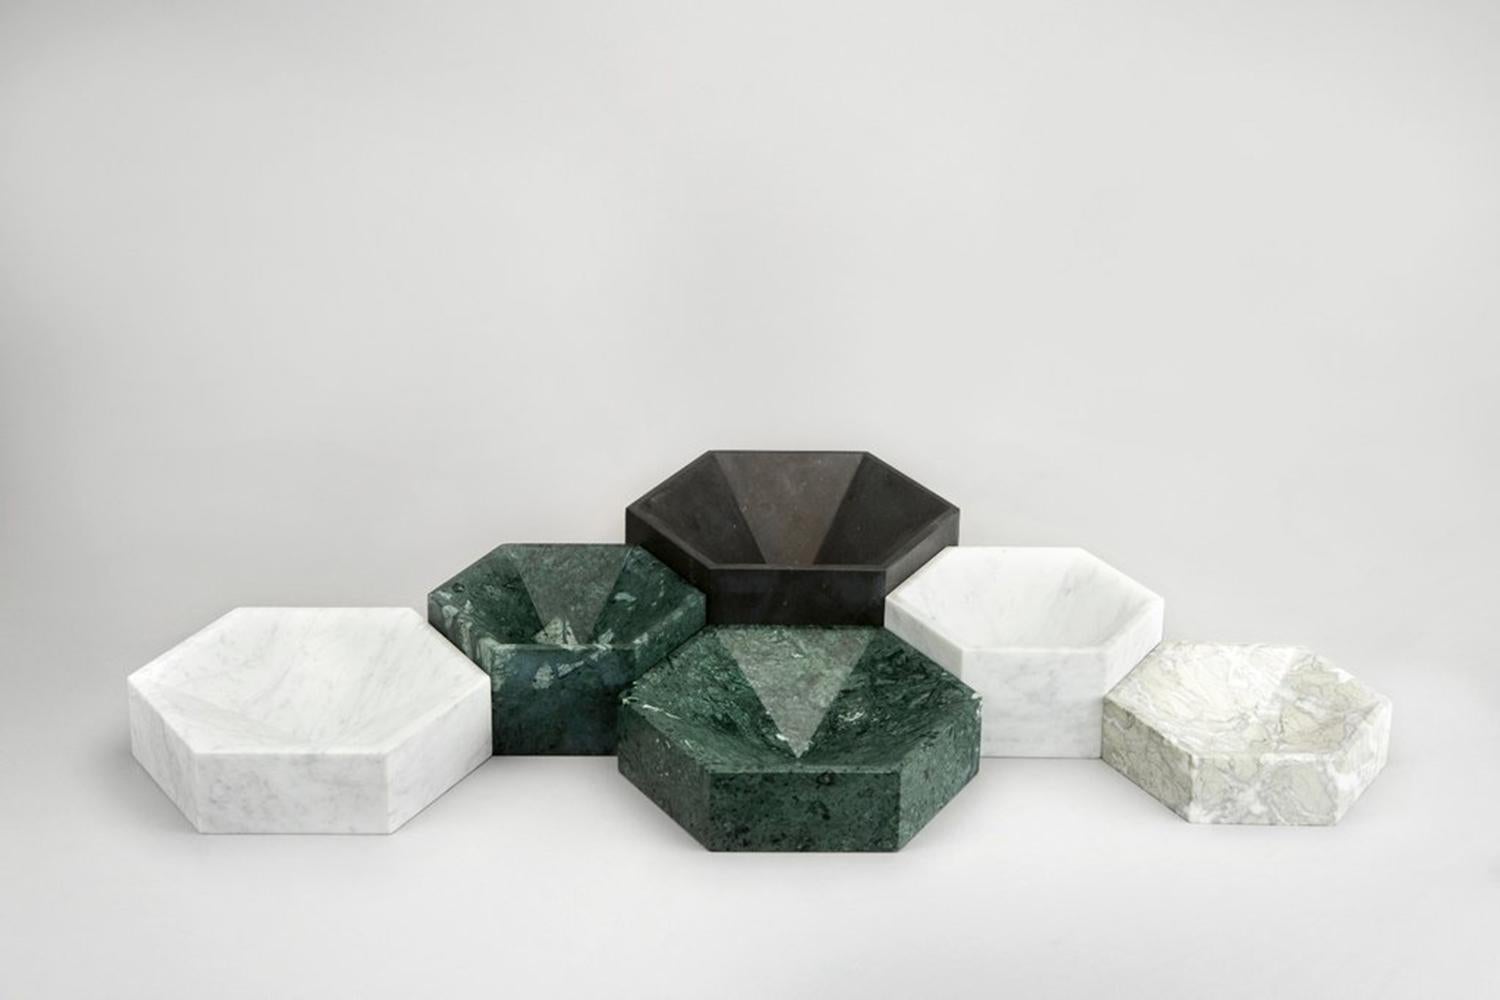 The hexagonal bowls are designed so that they can be laid together forming a honeycomb formation, either in same colour or in different colour combinations. 

Please note that no two marbles are alike and there will be variations in the pattern as